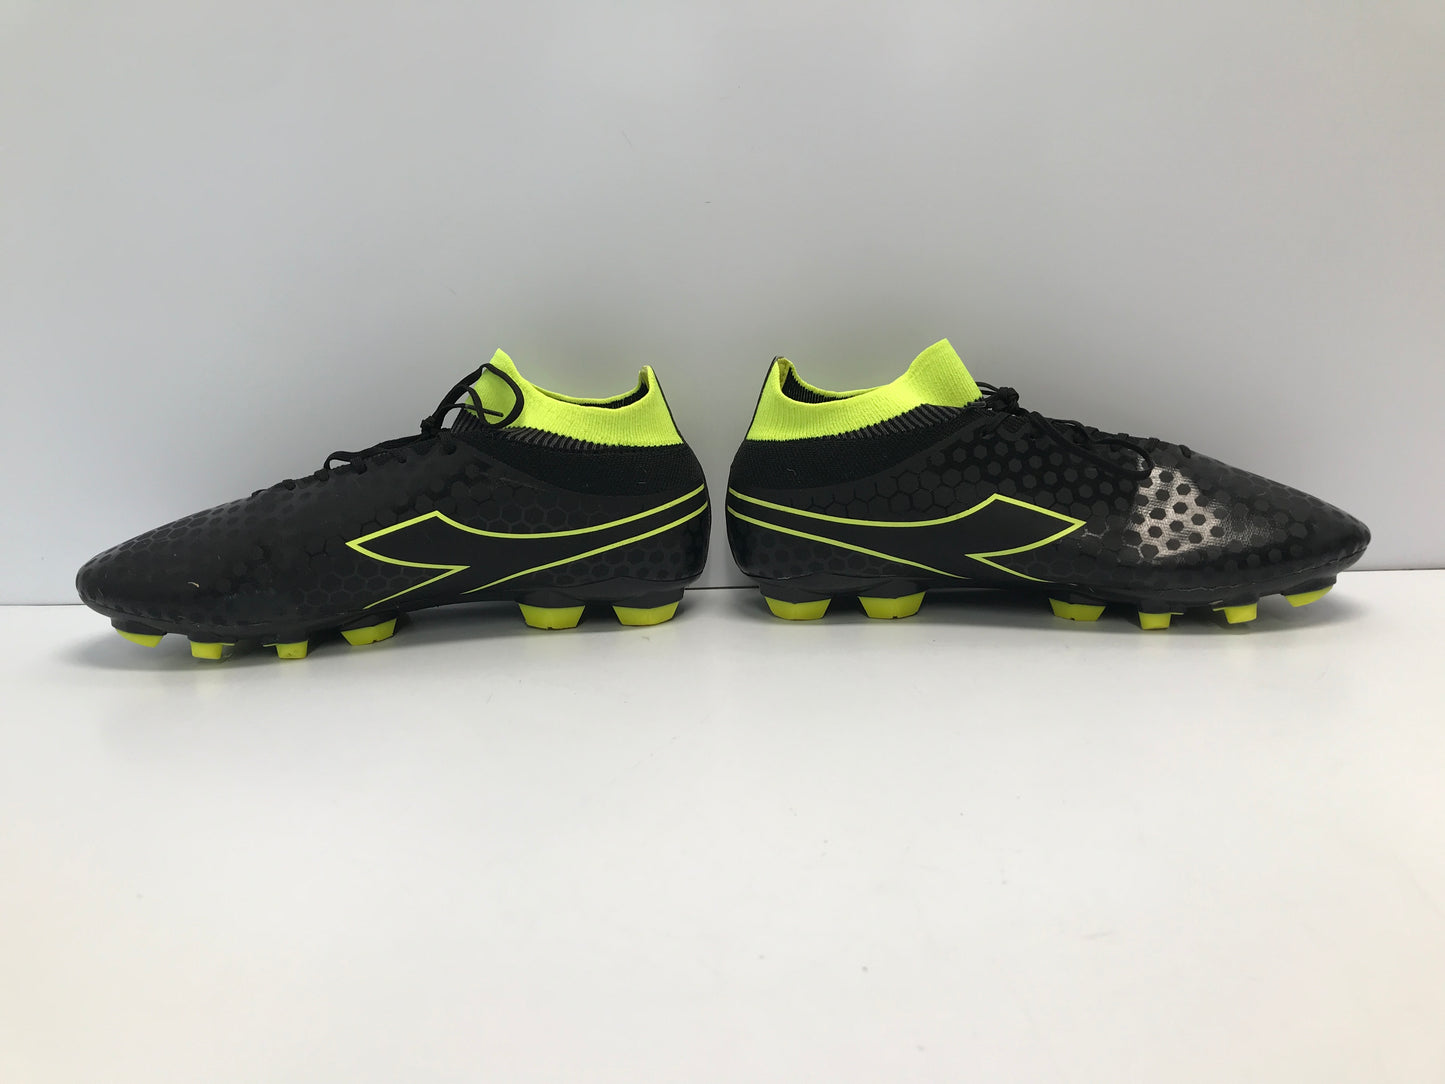 Football Rugby Soccer Shoes Cleats Men's Size 4.5 Diadora Slipper Feet Lime Black Like New